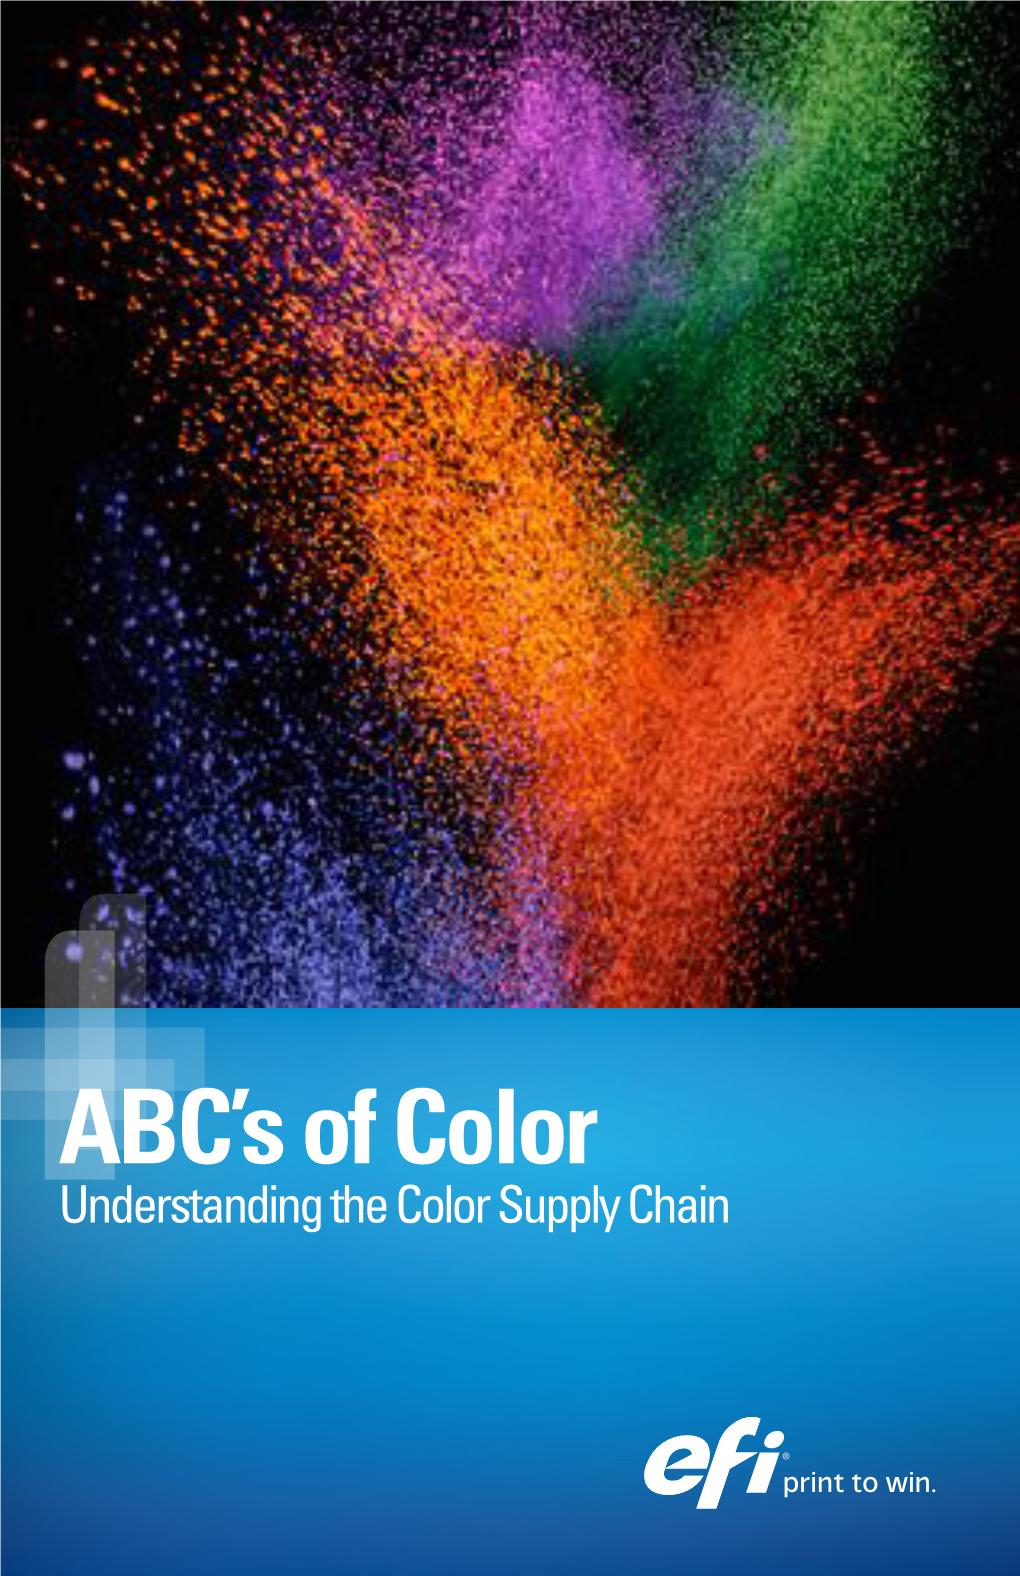 ABC's of Color